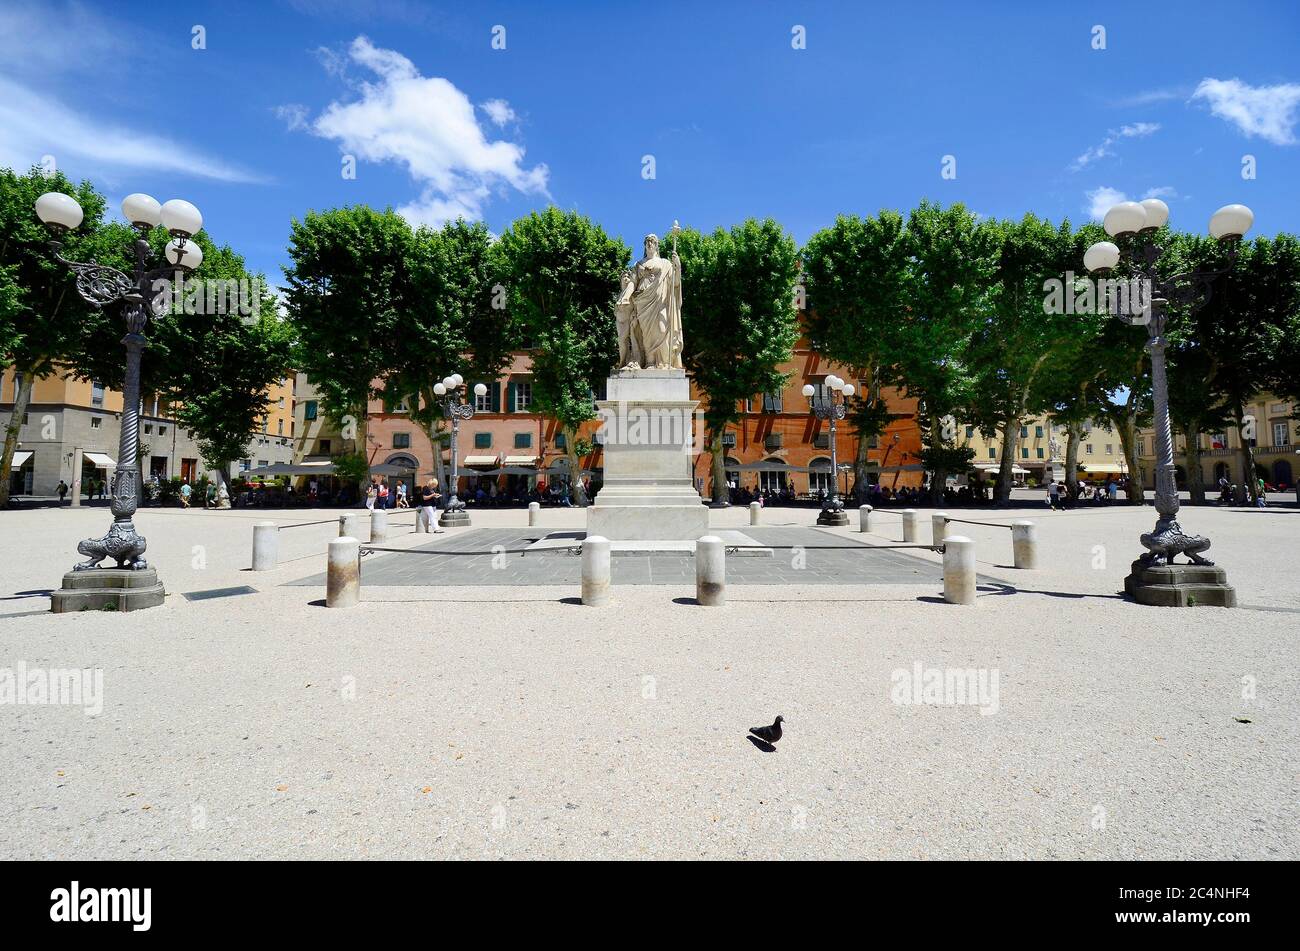 Lucca, Italy - June 11, 2012: Unidentified people and monument on Piazza Napoleone, one of the biggest squares in Lucca. It was designed by the sister Stock Photo